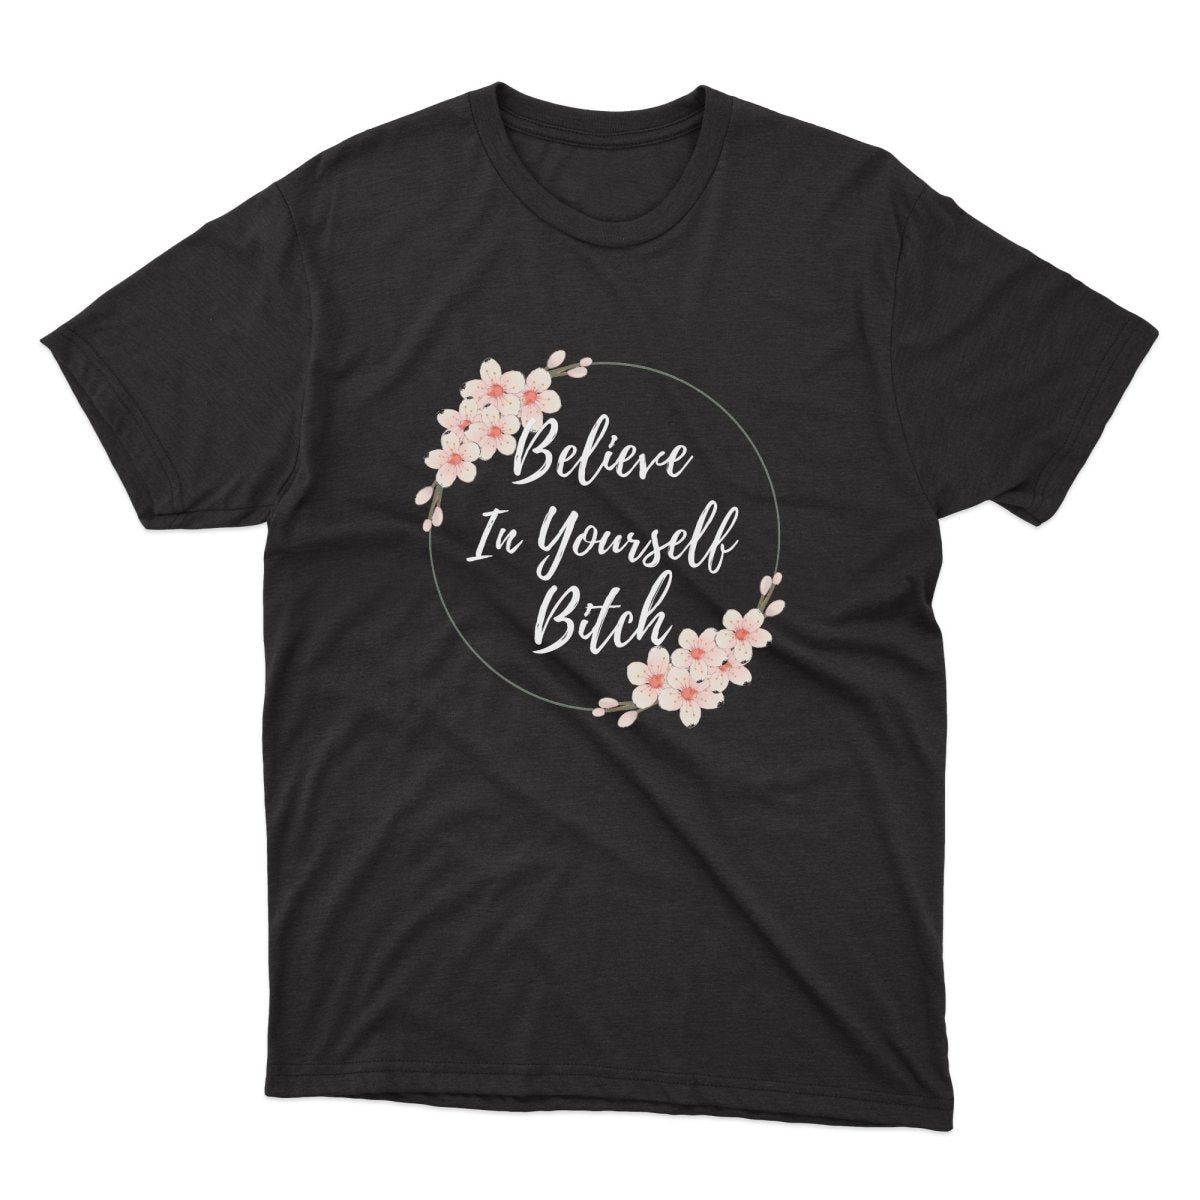 Believe In Yourself Bitch Shirt - stickerbullBelieve In Yourself Bitch ShirtShirtsPrintifystickerbull67684853556923892580BlackSa black t - shirt with the words believe in yourself, and flowers